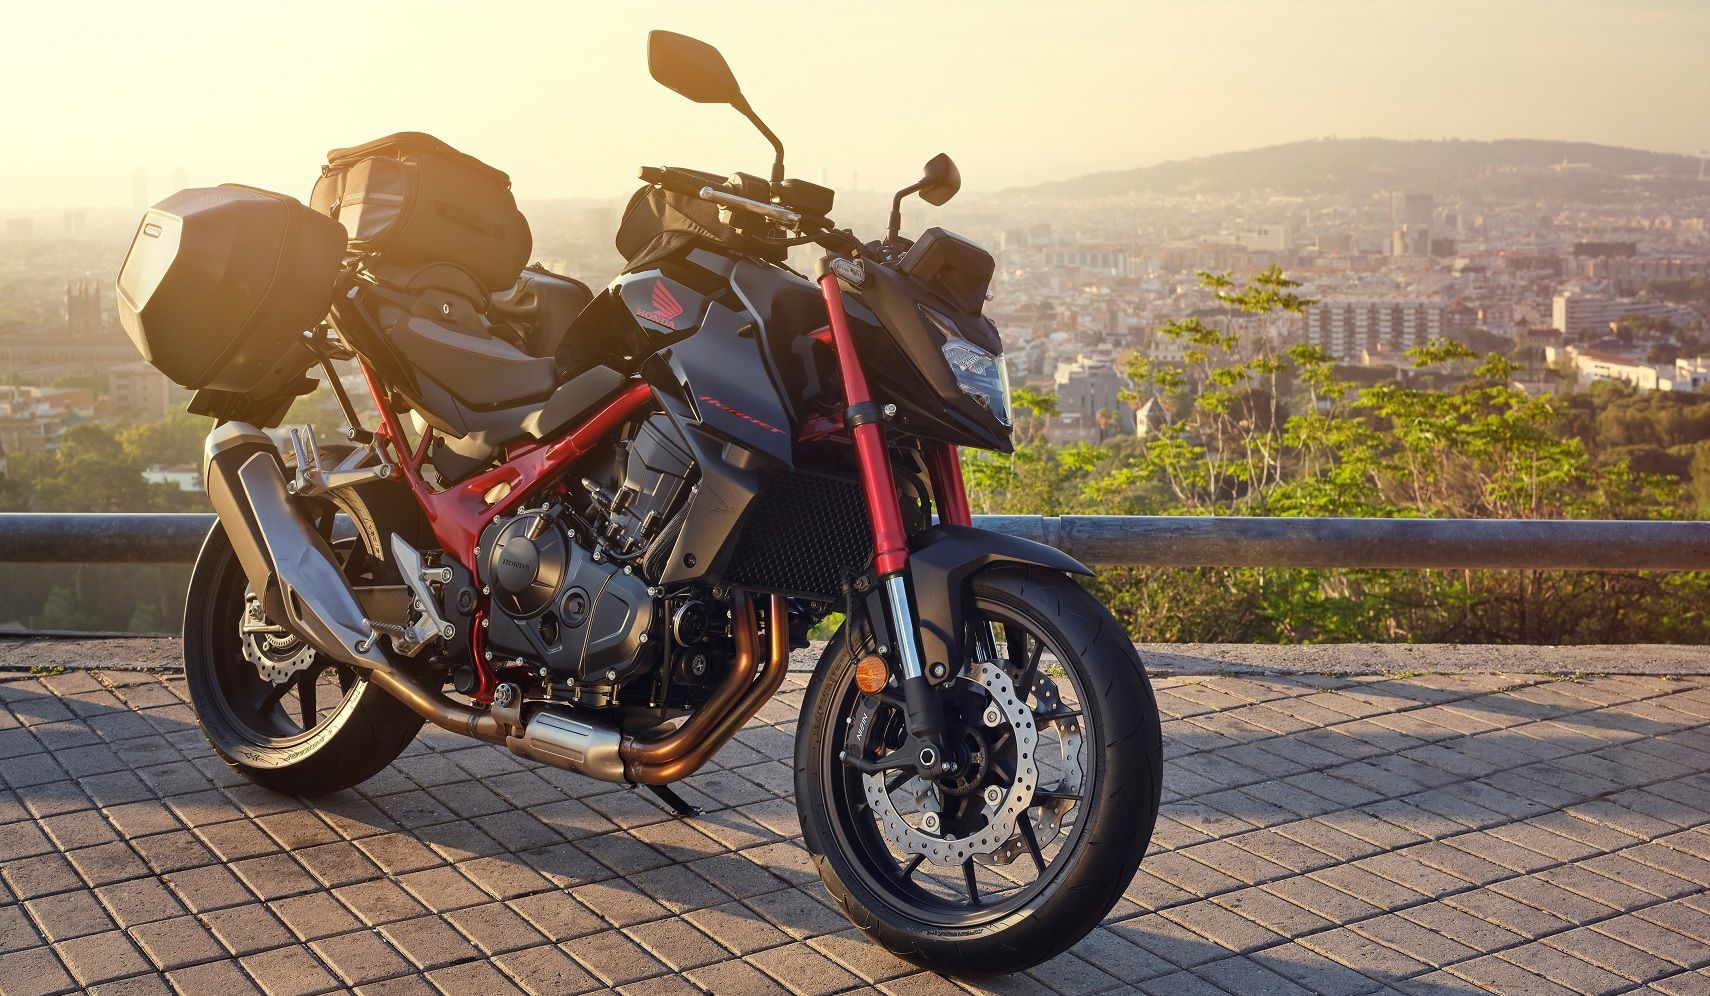 What We Love About The 2023 Honda CB750 Hornet